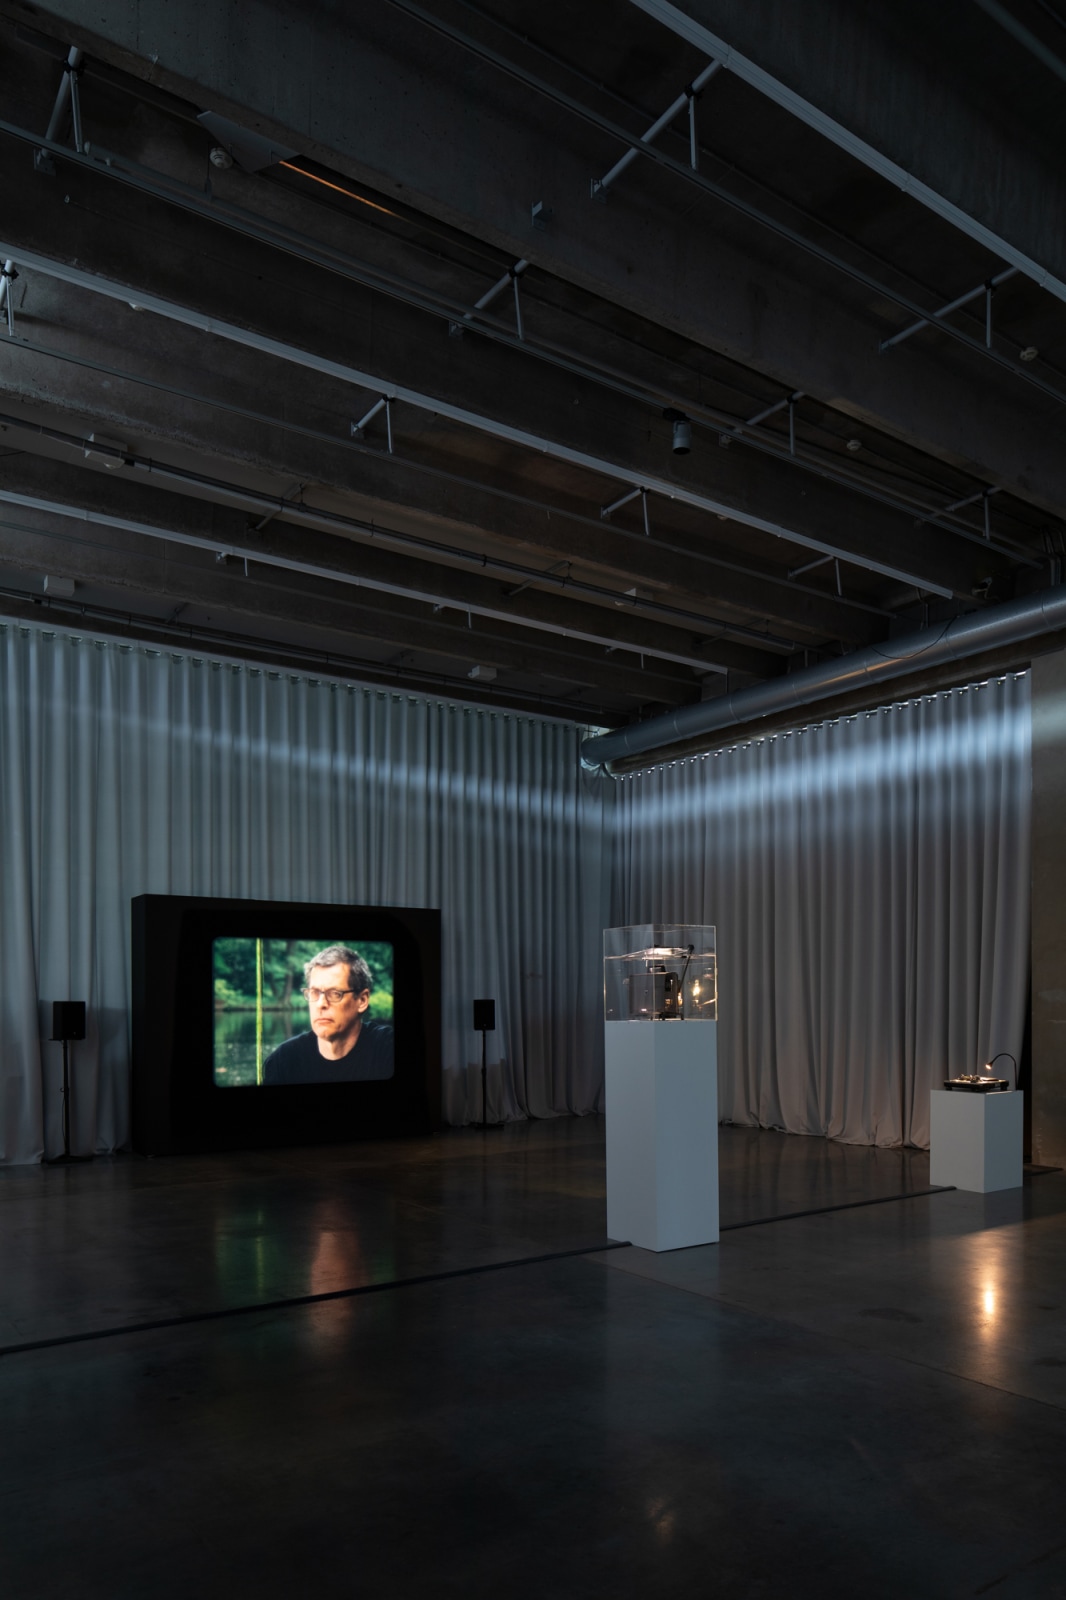 <div class="image_caption_container"><div class="image_caption">Exhibition view: <strong>Phonokinetoscope</strong>, Garage Museum of Contemporary Art, Moscow, 2021. Photo © Ivan Erofeev</div></div>